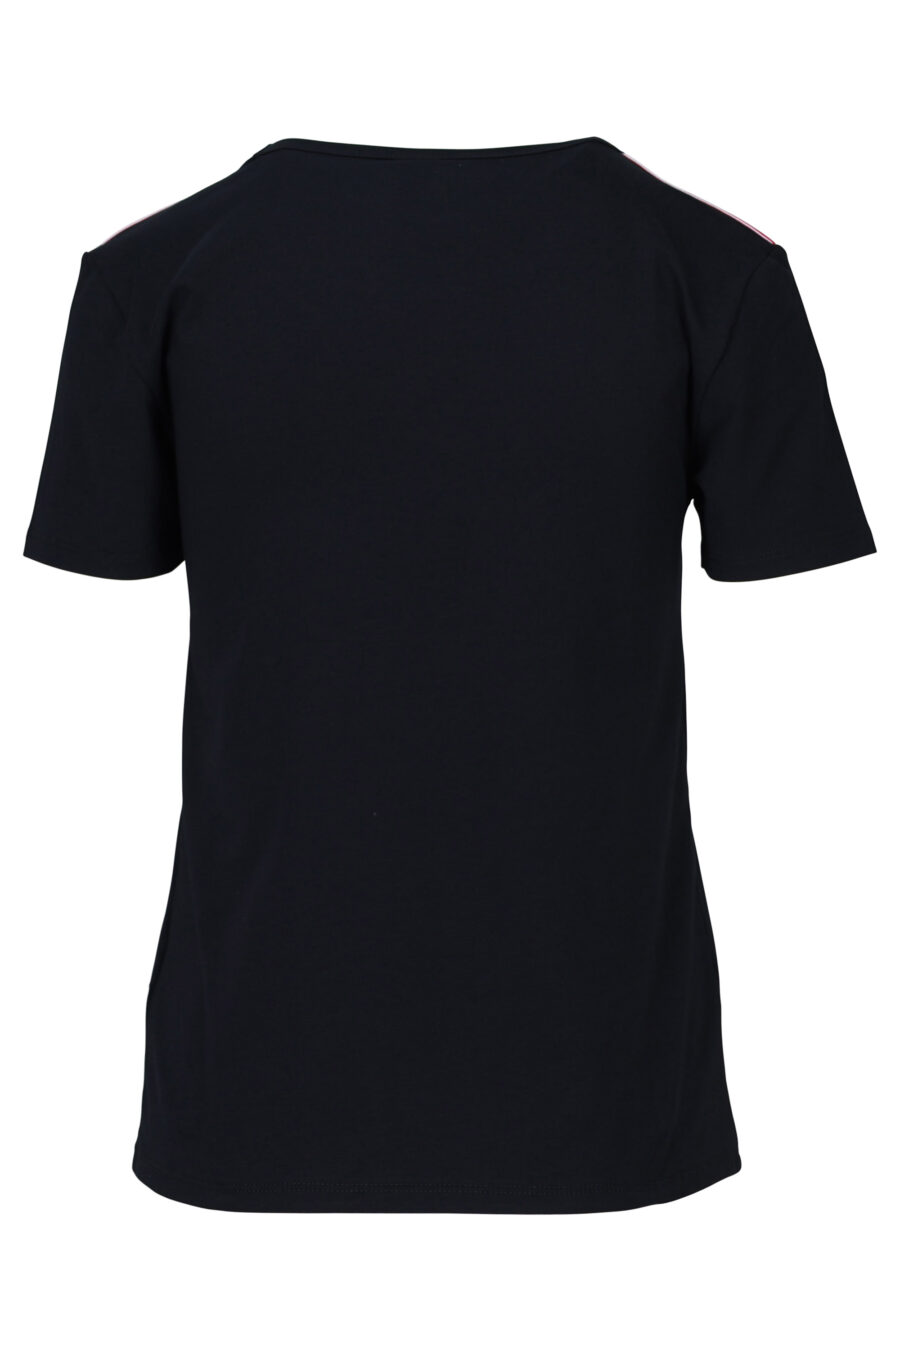 Black T-shirt with logo on shoulders - 667113033723 1